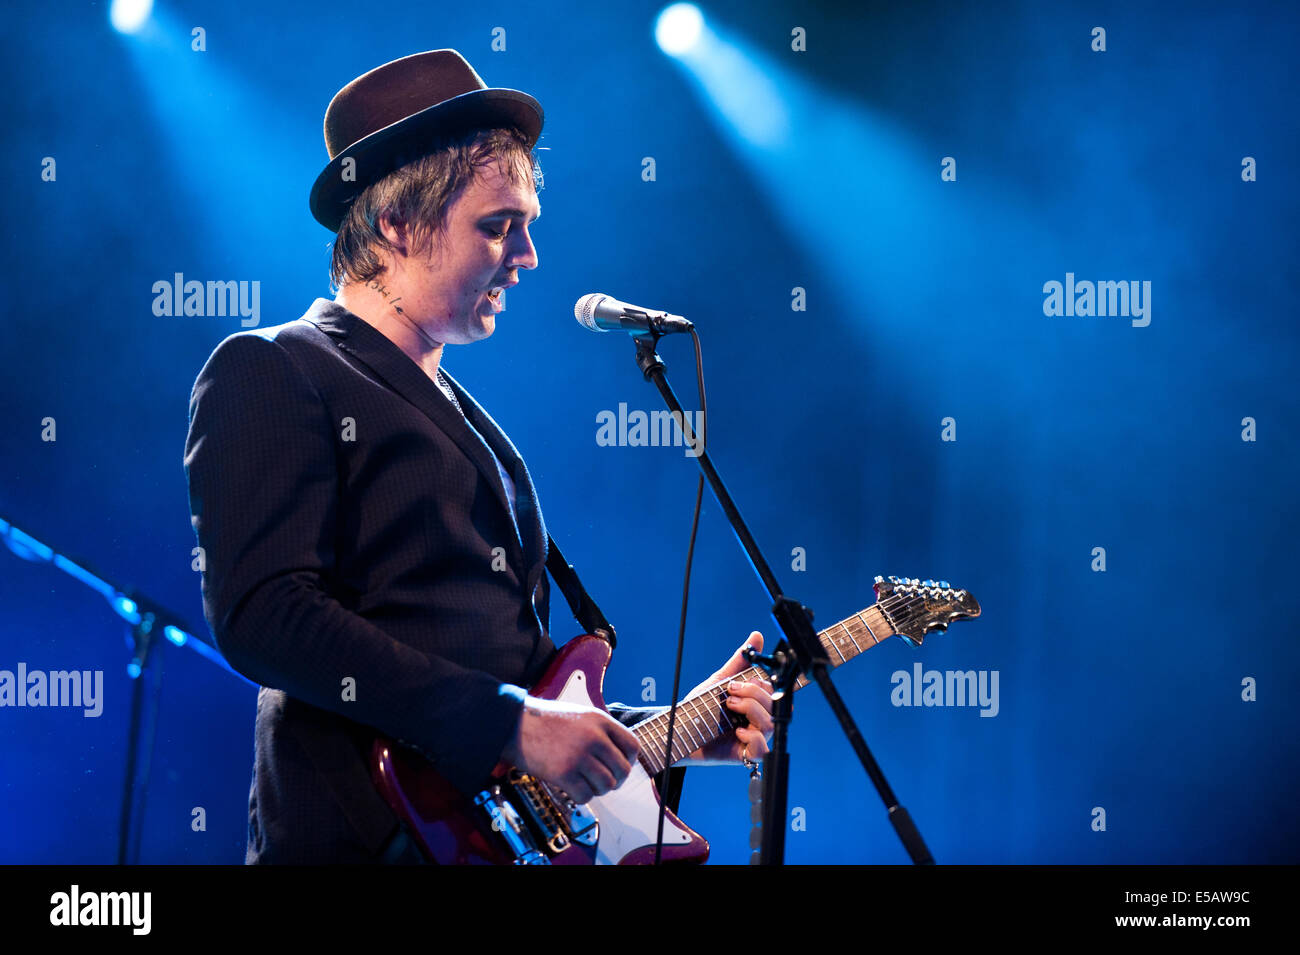 Lšrrach, Germany. 25th July, 2014. Peter Doherty (Vocals/ Guitar) from English rock band Babyshambles performs live at Stimmen (Voices) music festival in Lšrrach, Germany. Photo: Miroslav Dakov/ Alamy Live News Stock Photo